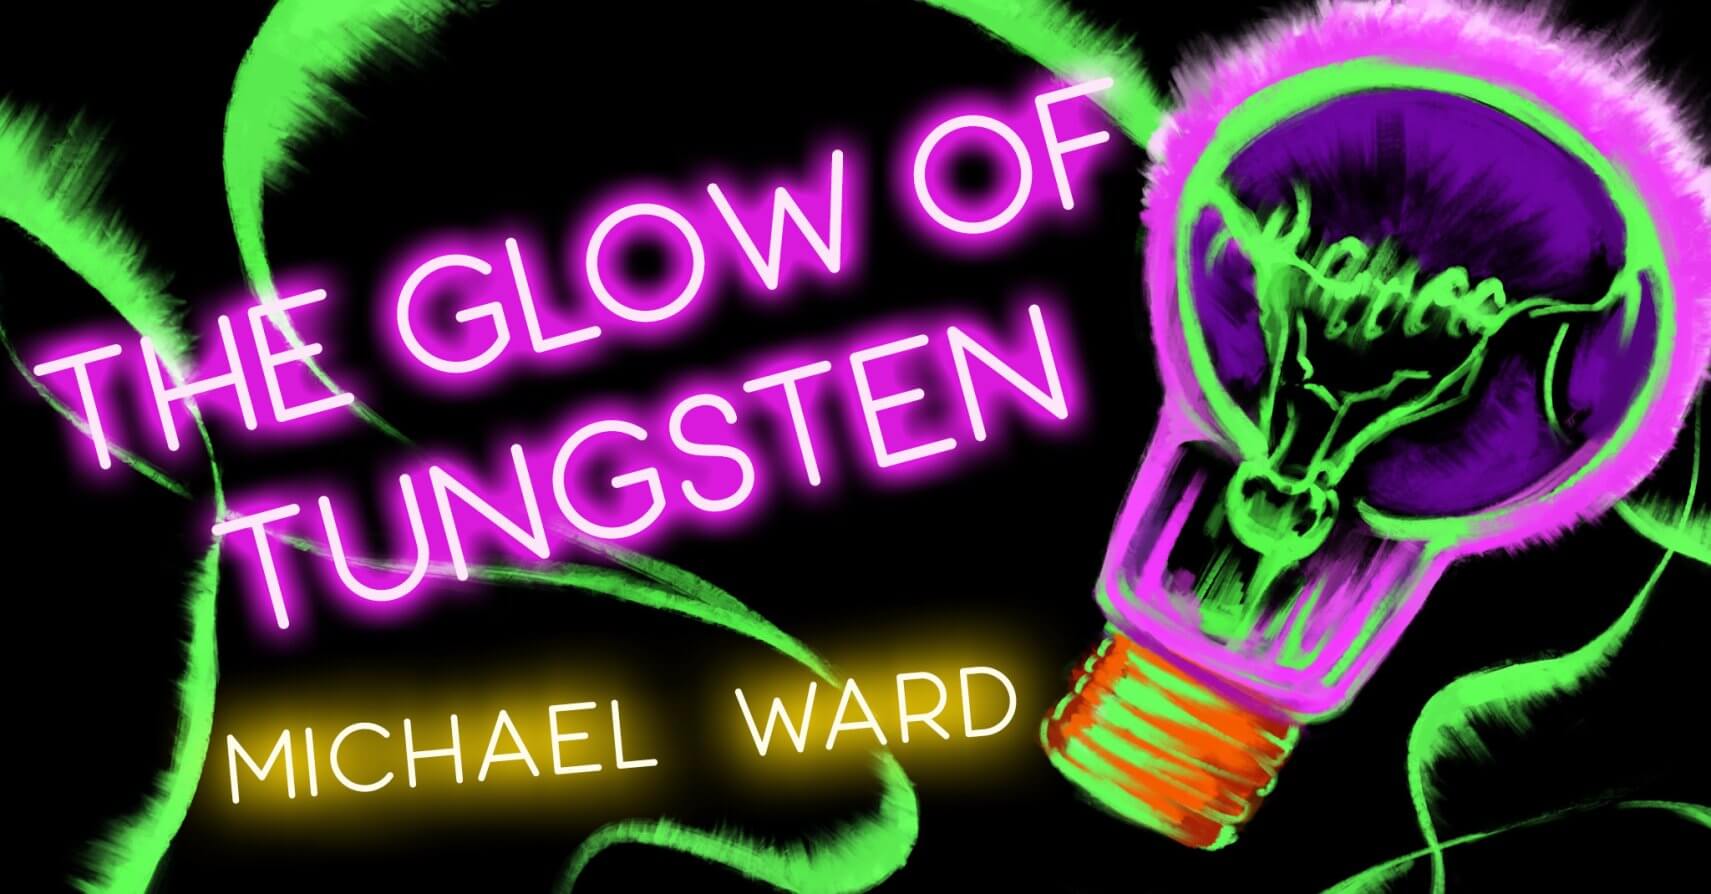 THE GLOW OF TUNGSTEN by Michael Ward